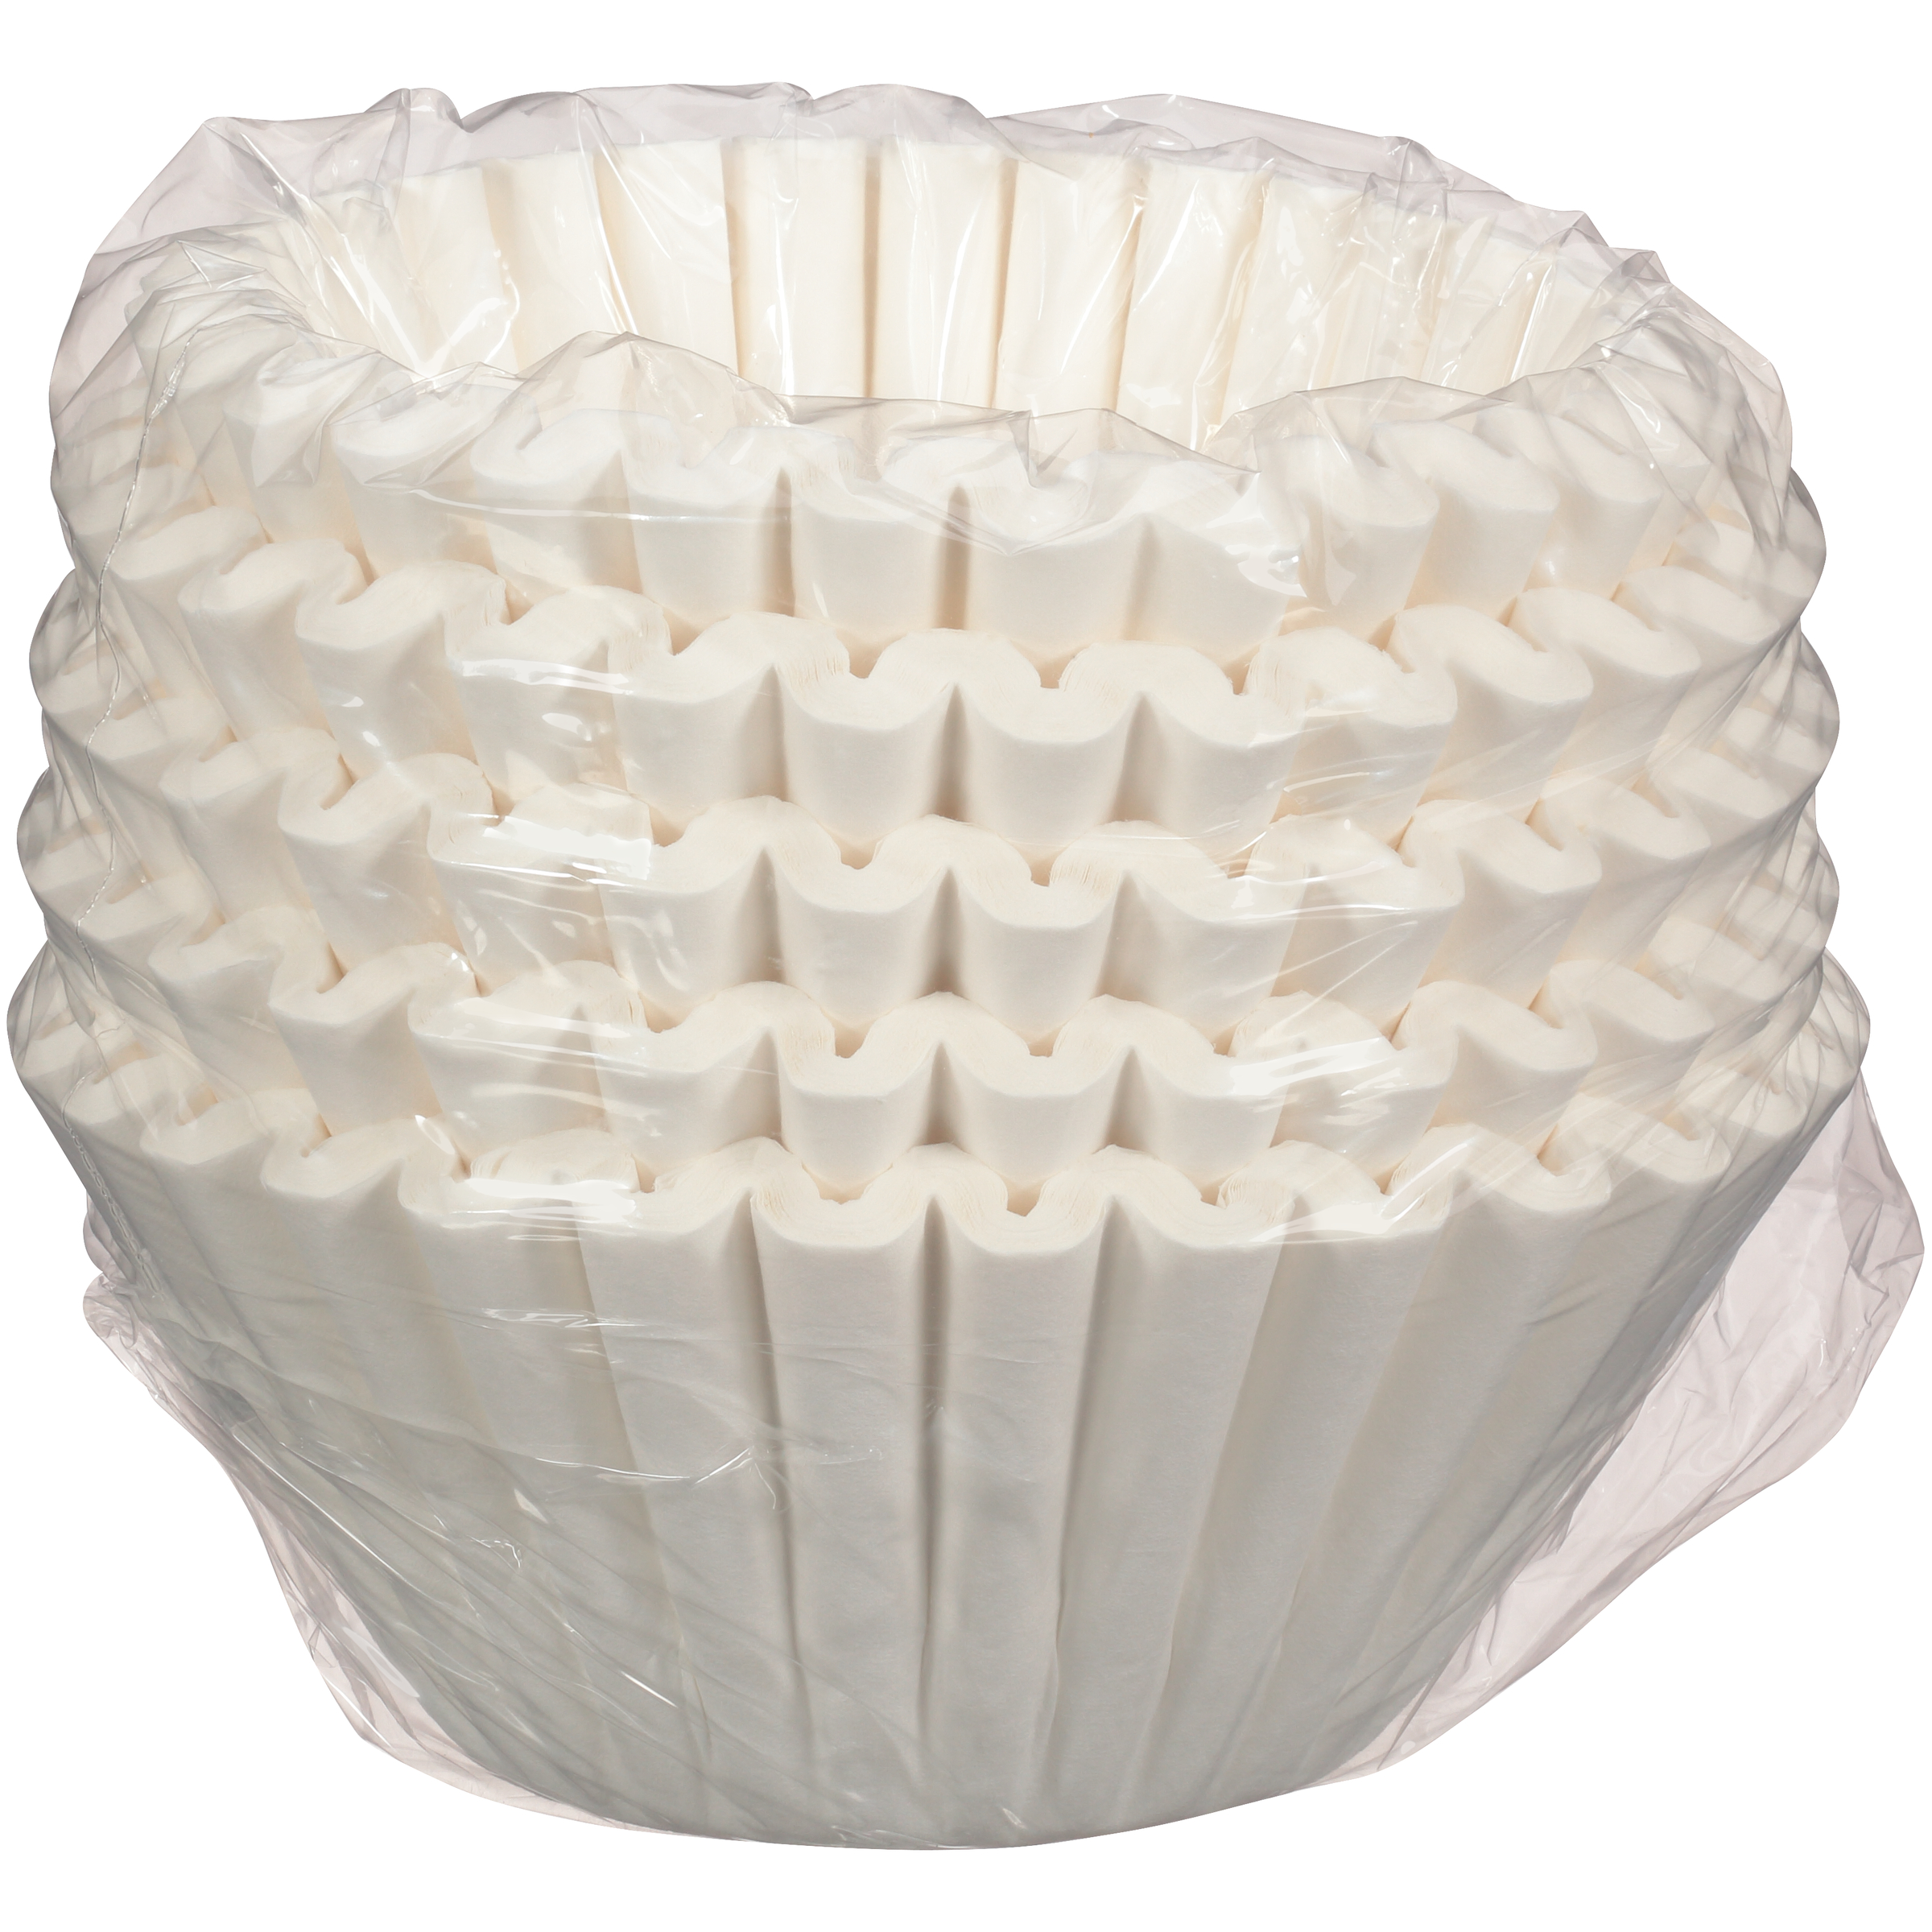 COFFEE FILTER 12 CUP